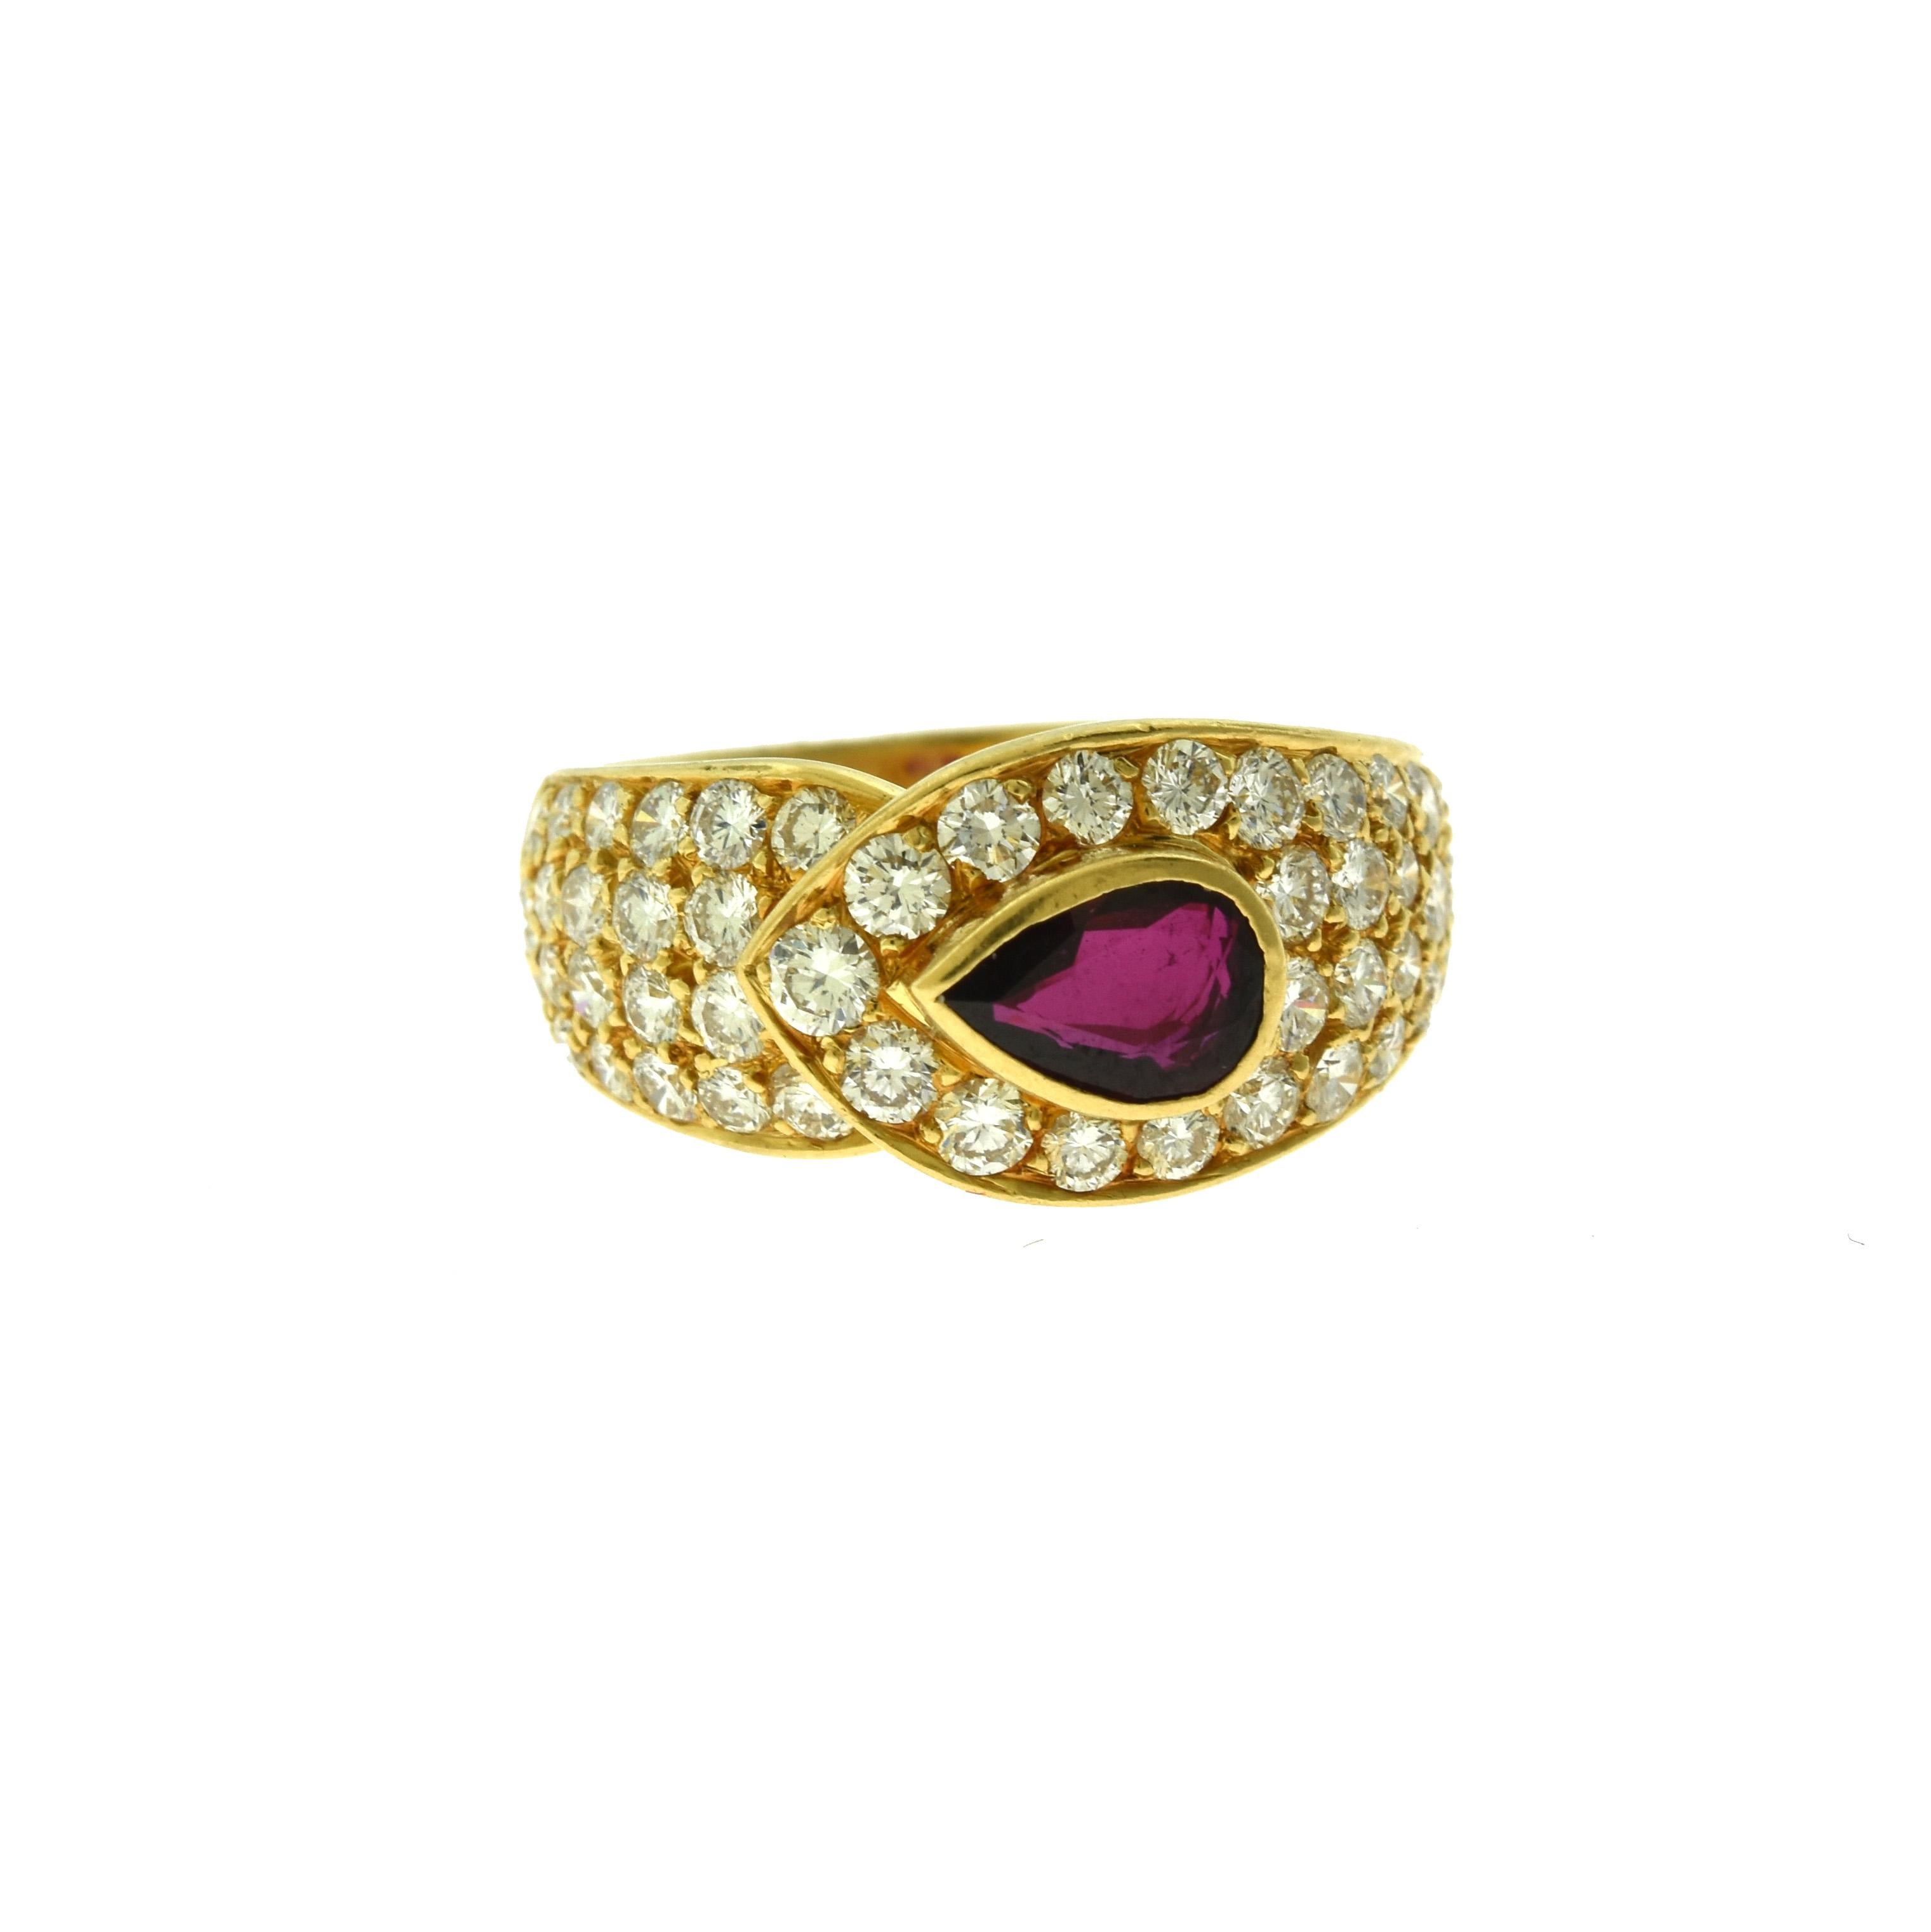 Questions? Contact Us at 786,482,8100

Ring Size: 5.75 (US)

Designer: Van Cleef & Arpels

Style: Cocktail Ring

Metal Type: Yellow Gold

Metal Purity: 18k

Stones: 51 Round Brilliant Cut Diamonds = approx. 1.50 ct, 1 Pear Shape Ruby = 7.3 x 5 x 1.6